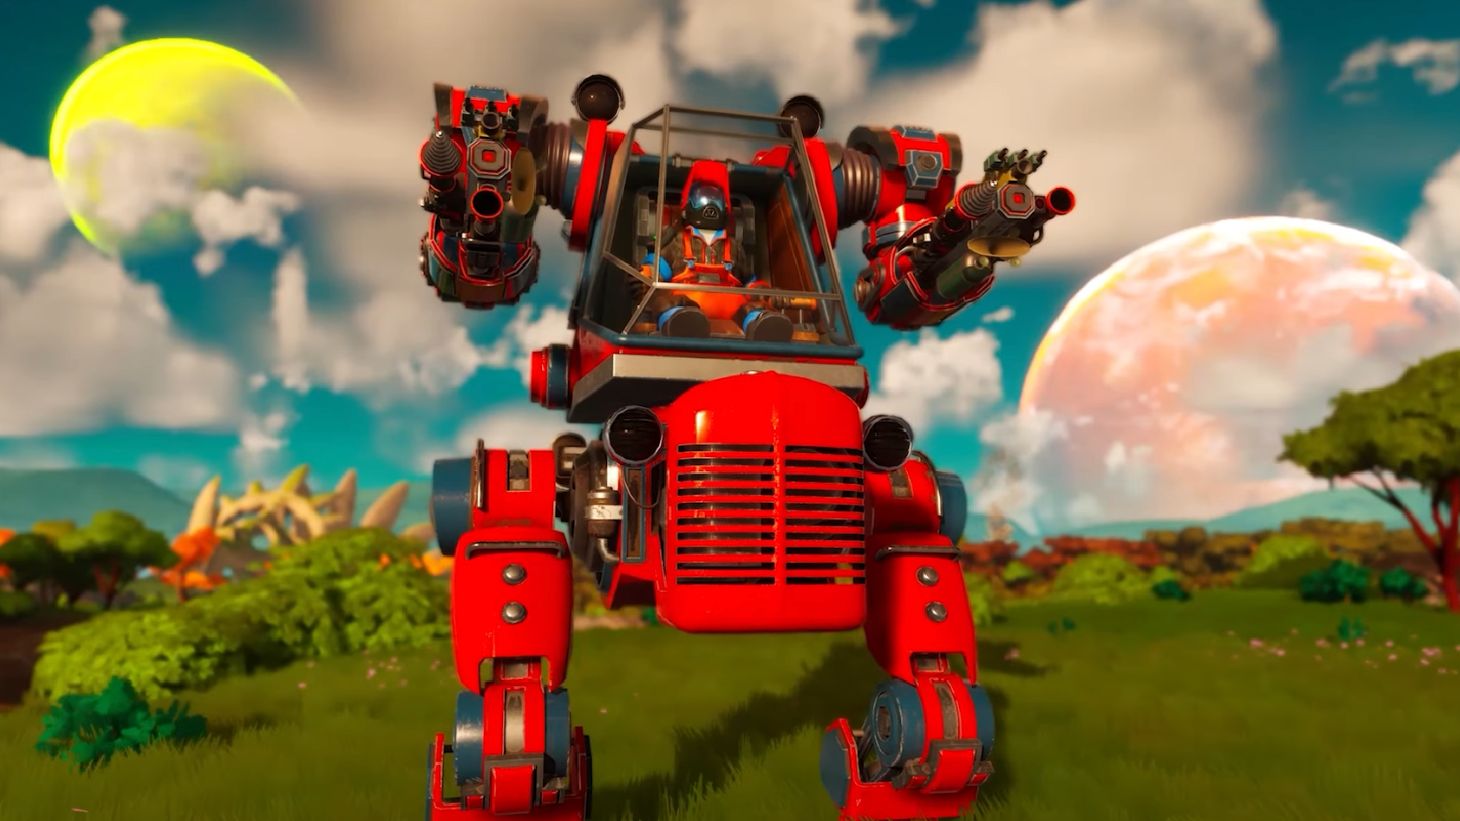 Lightyear Frontier Release Date: A person in a mech can be seen